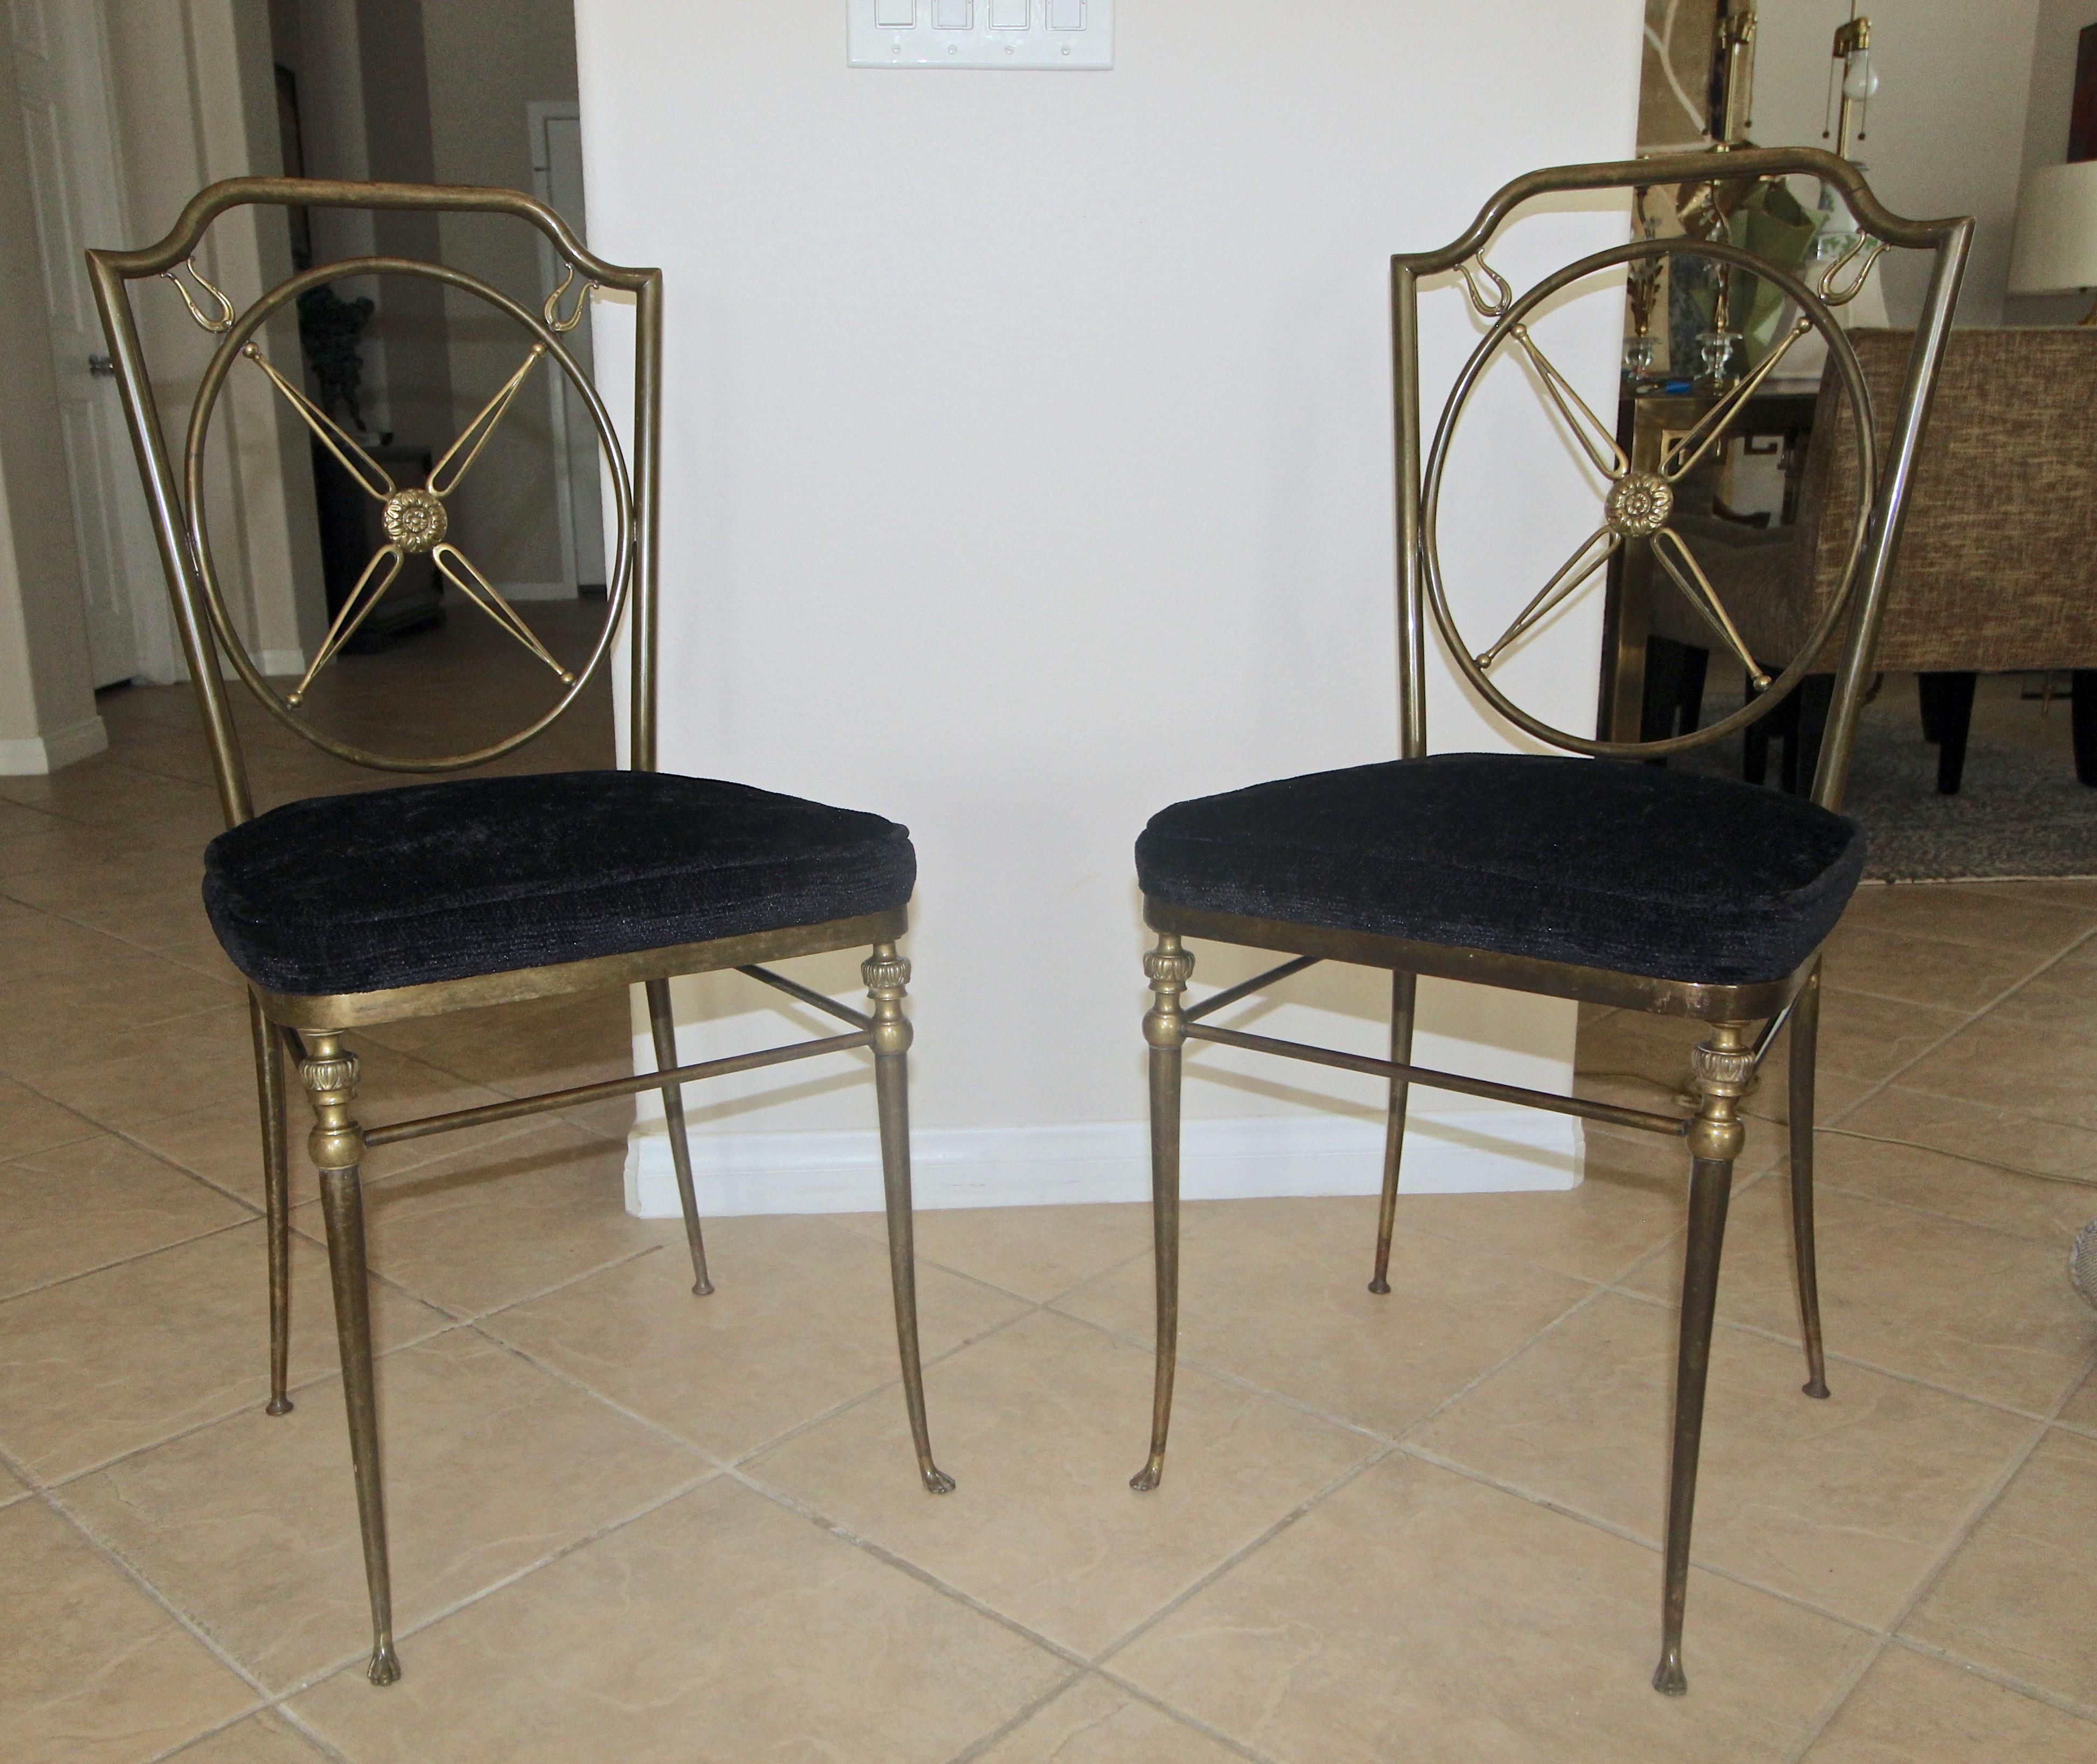 Magnificent pair of French directoire style bronze side or hall chairs. The chairs have a beautiful original warm aged patina. Expertly crafted detailing through out including delicate paw feet, and a “X” motif with center paterae. The upholstering